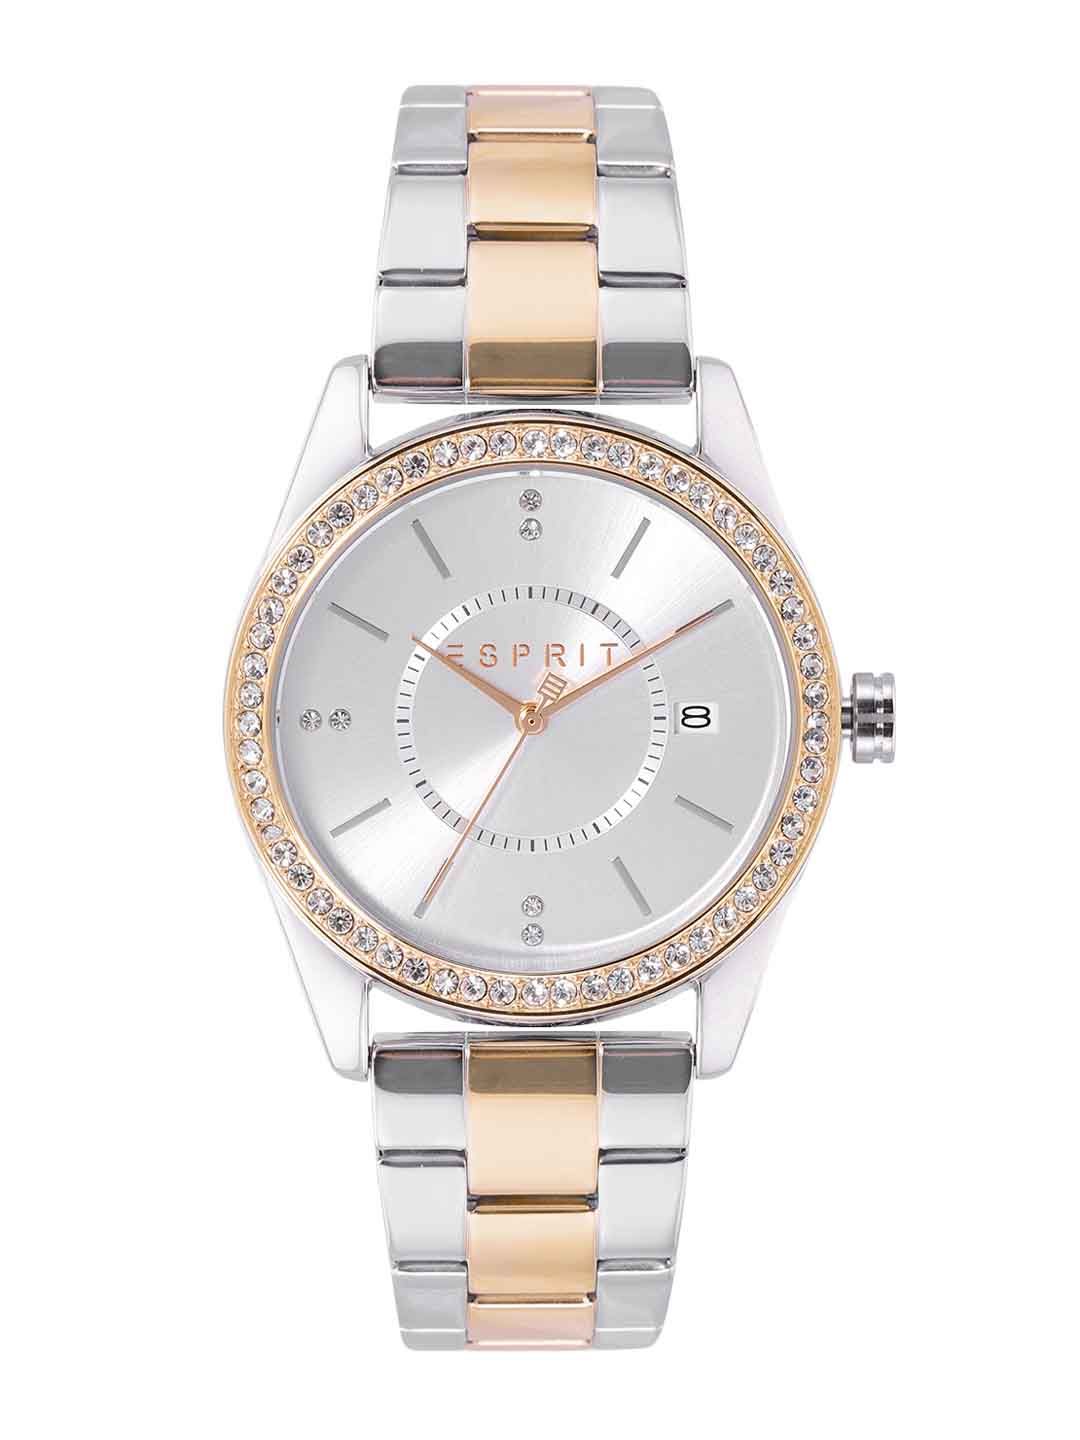 ESPRIT Women Silver Toned Analogue Watch ES1L196M0105 Price in India